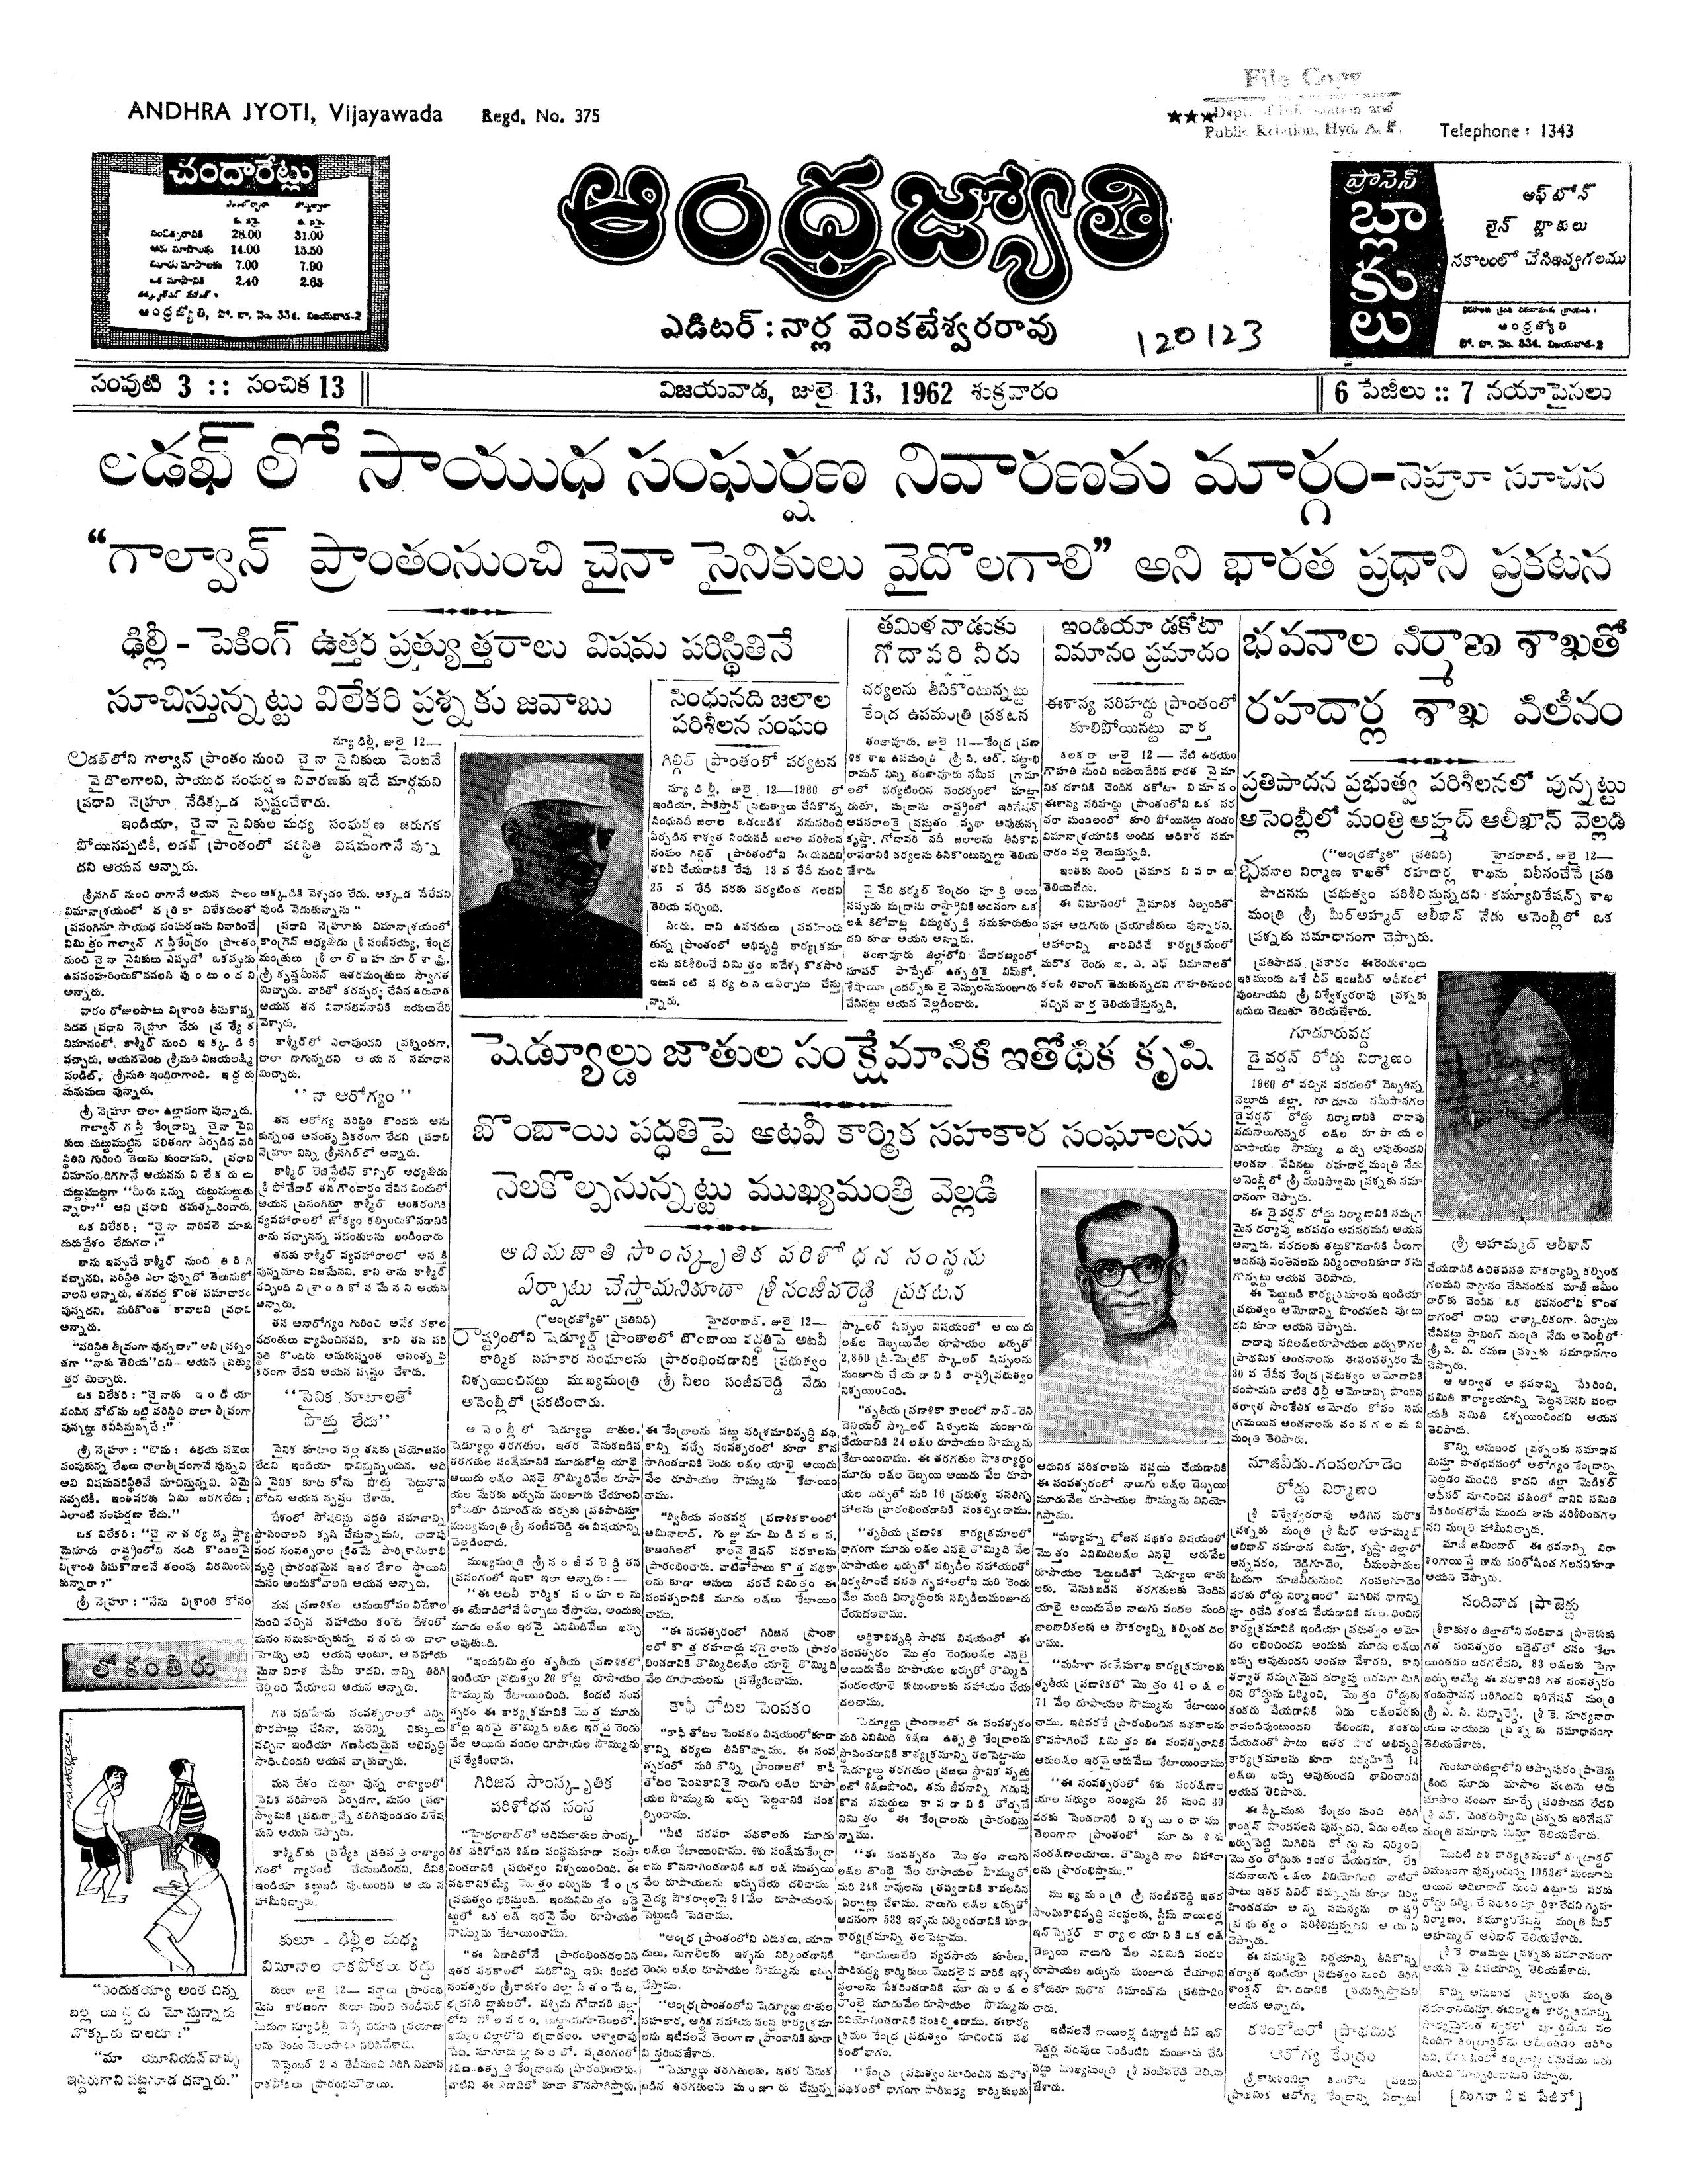 ANDHRAJYOTHI Volume no 3 issue no 13 : AndhraJyothi : Free Download,  Borrow, and Streaming : Internet Archive